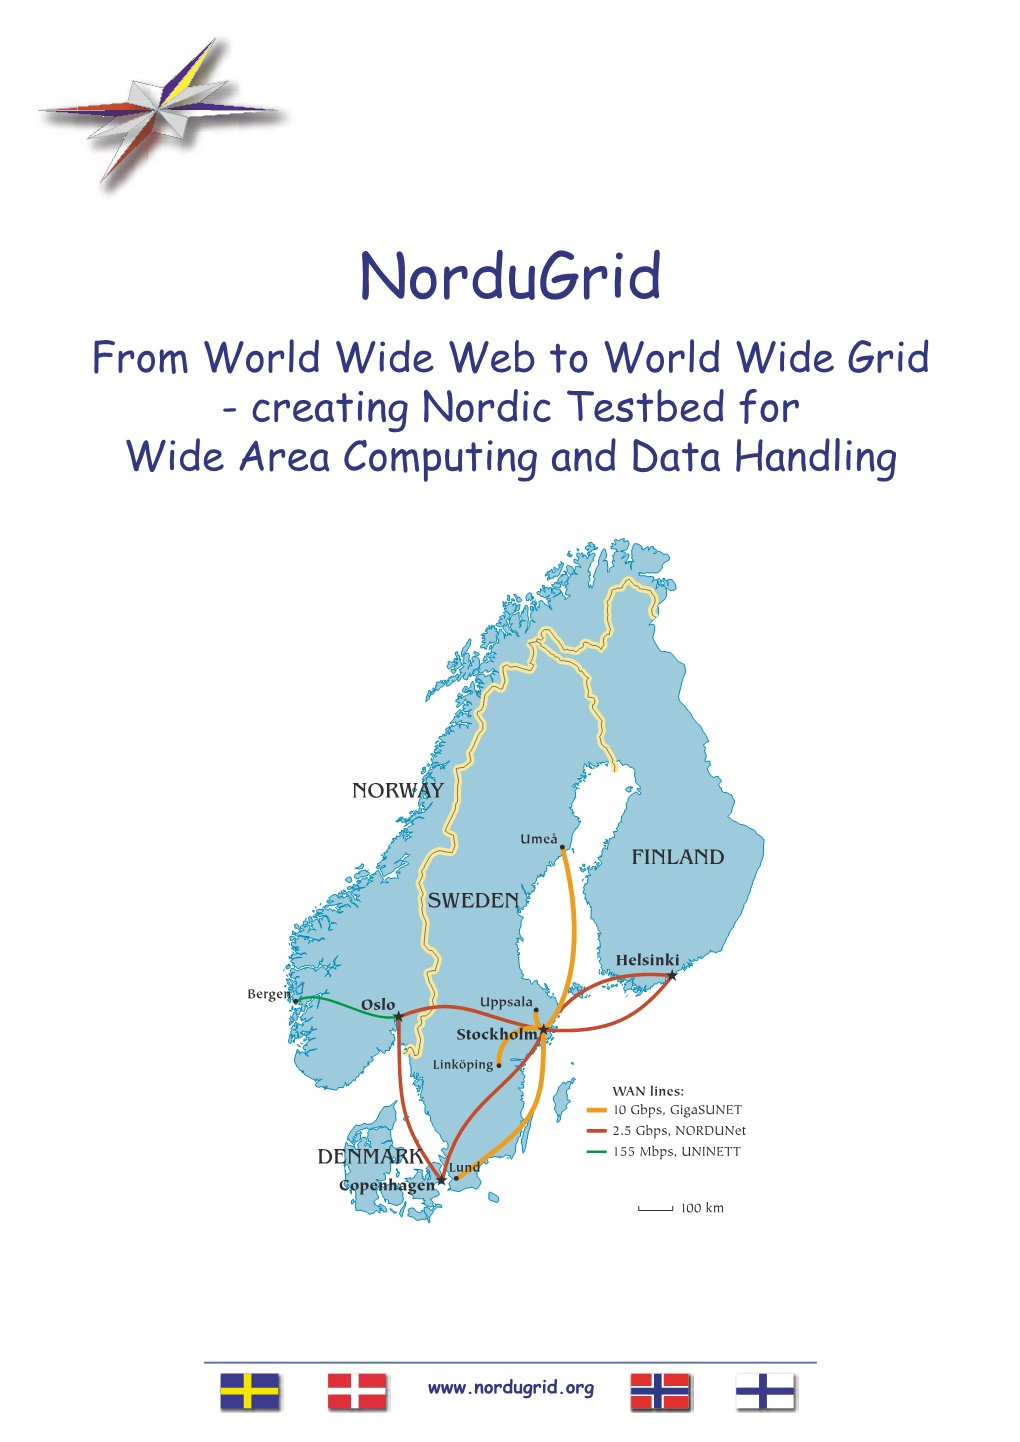 Nordugrid from World Wide Web to World Wide Grid - Creating Nordic Testbed for Wide Area Computing and Data Handling